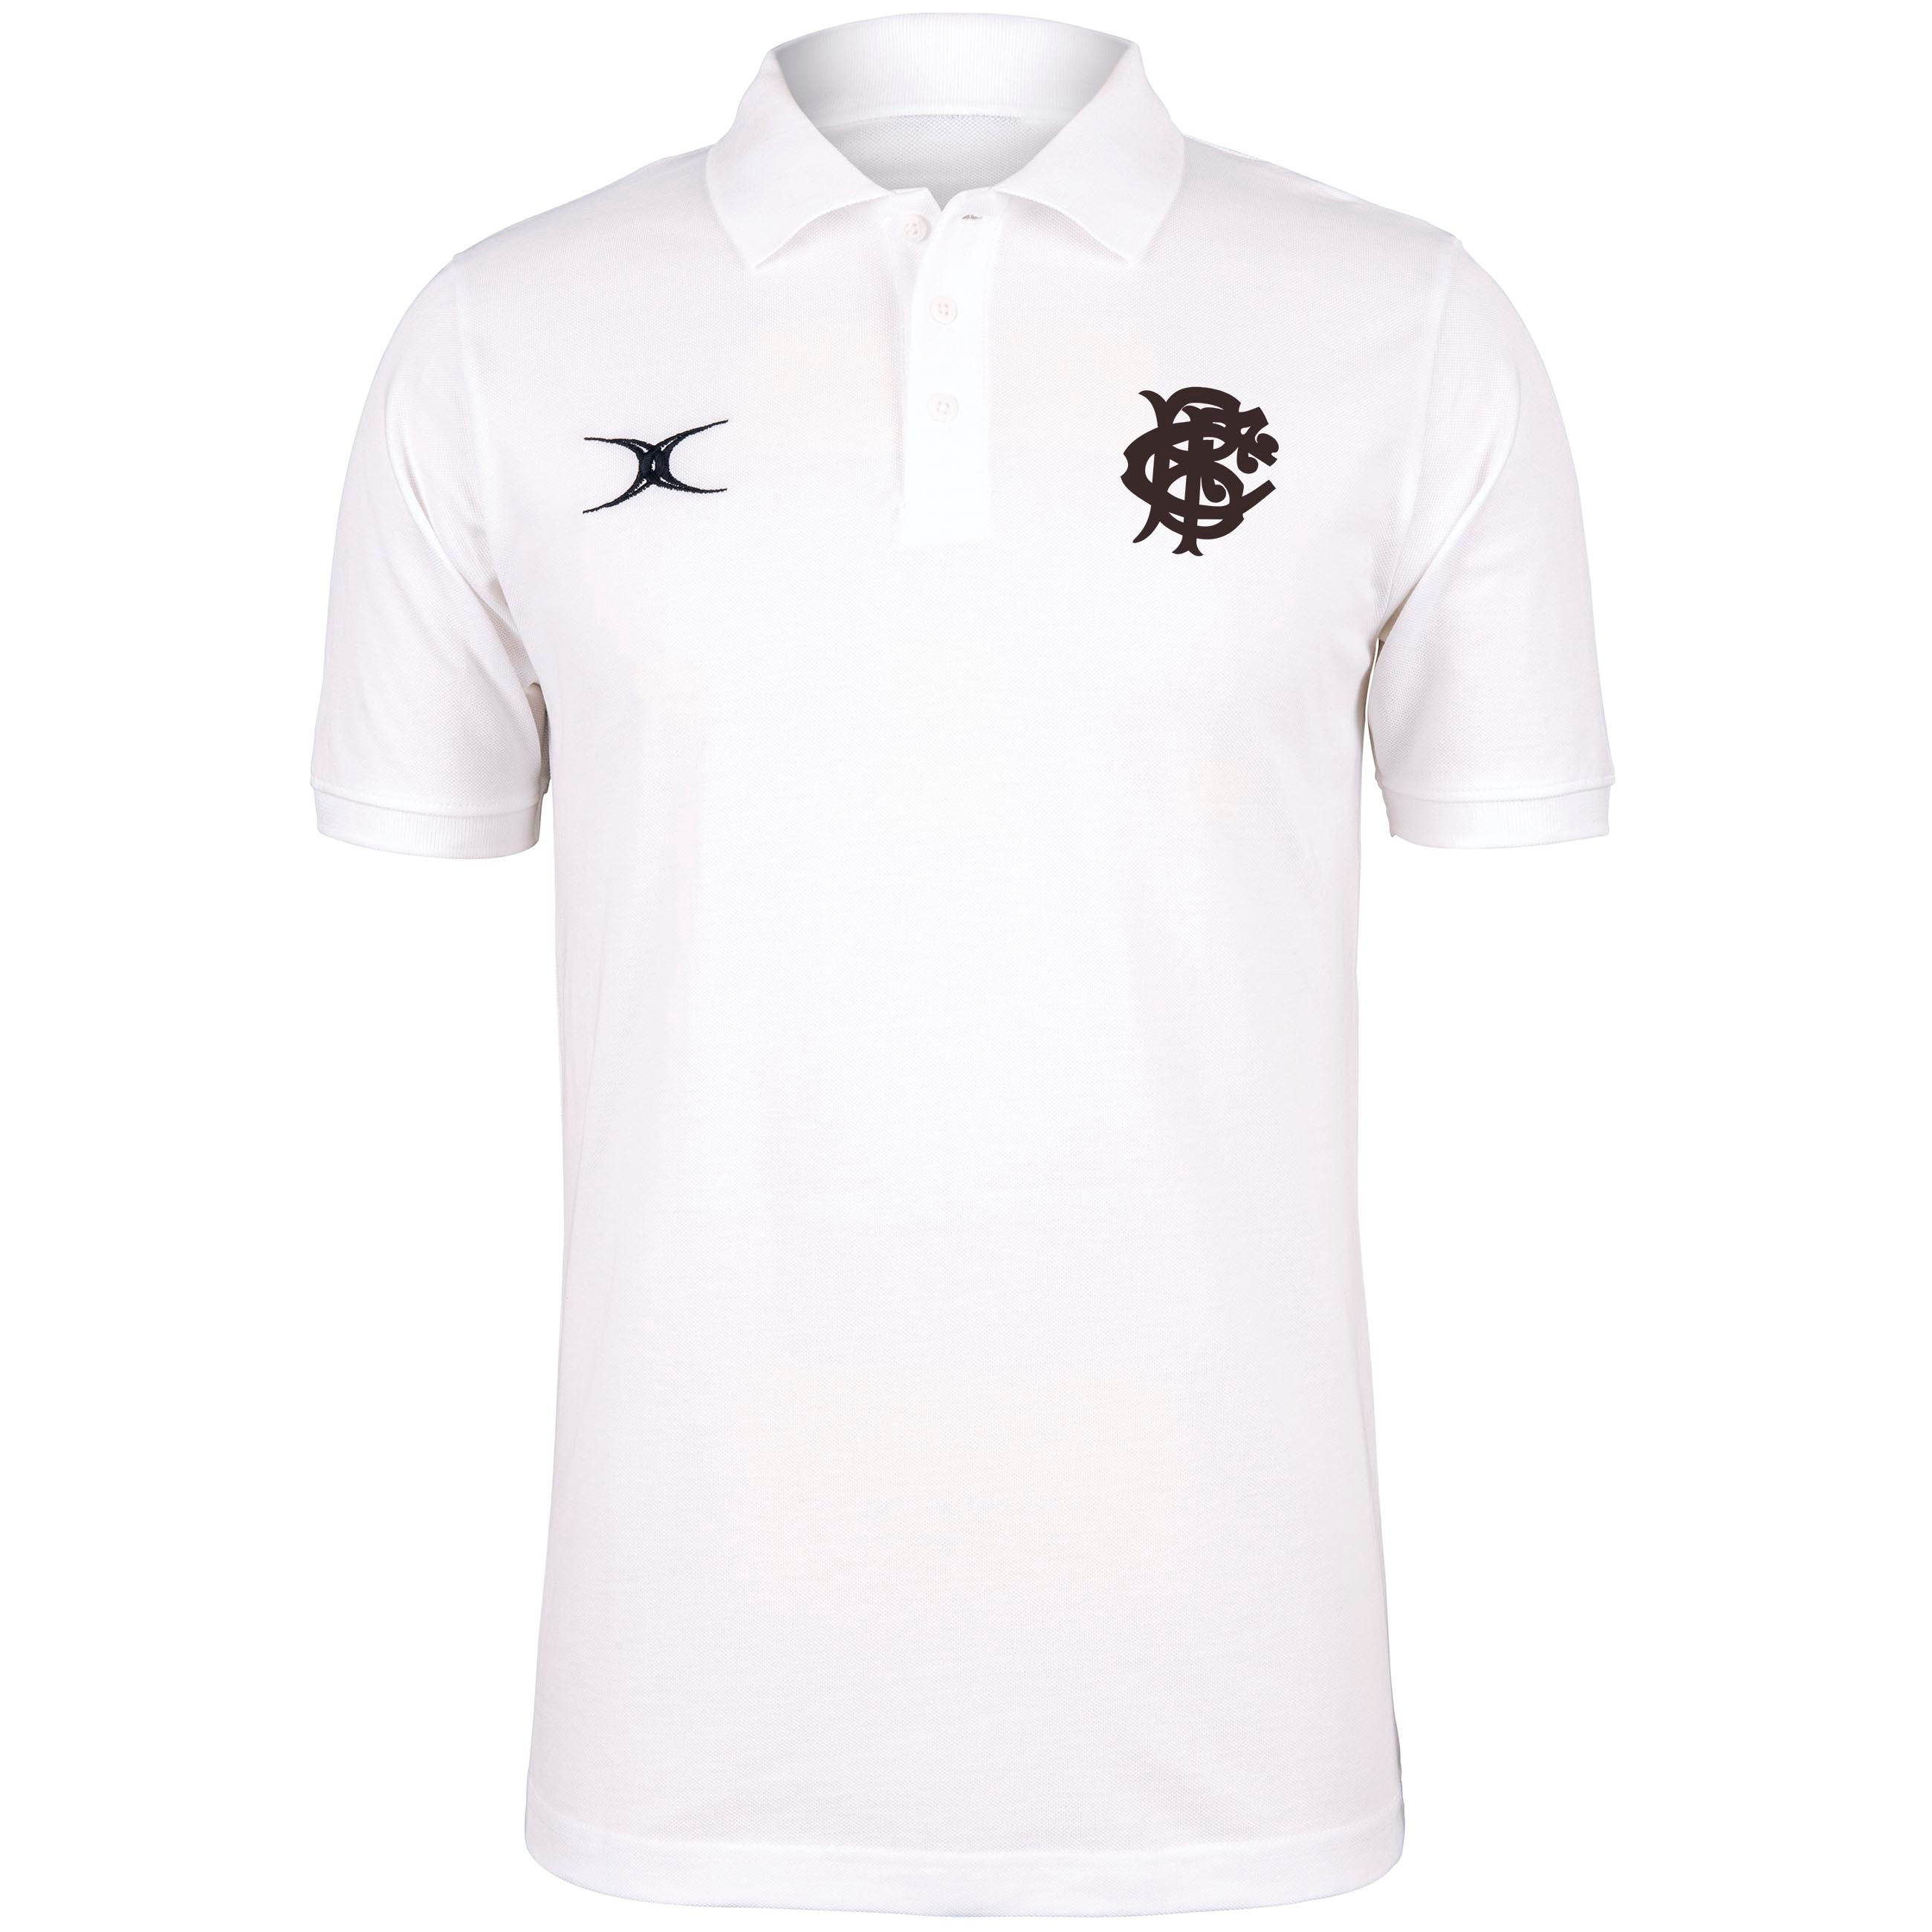 Barbarian FC Adult's Polo - White